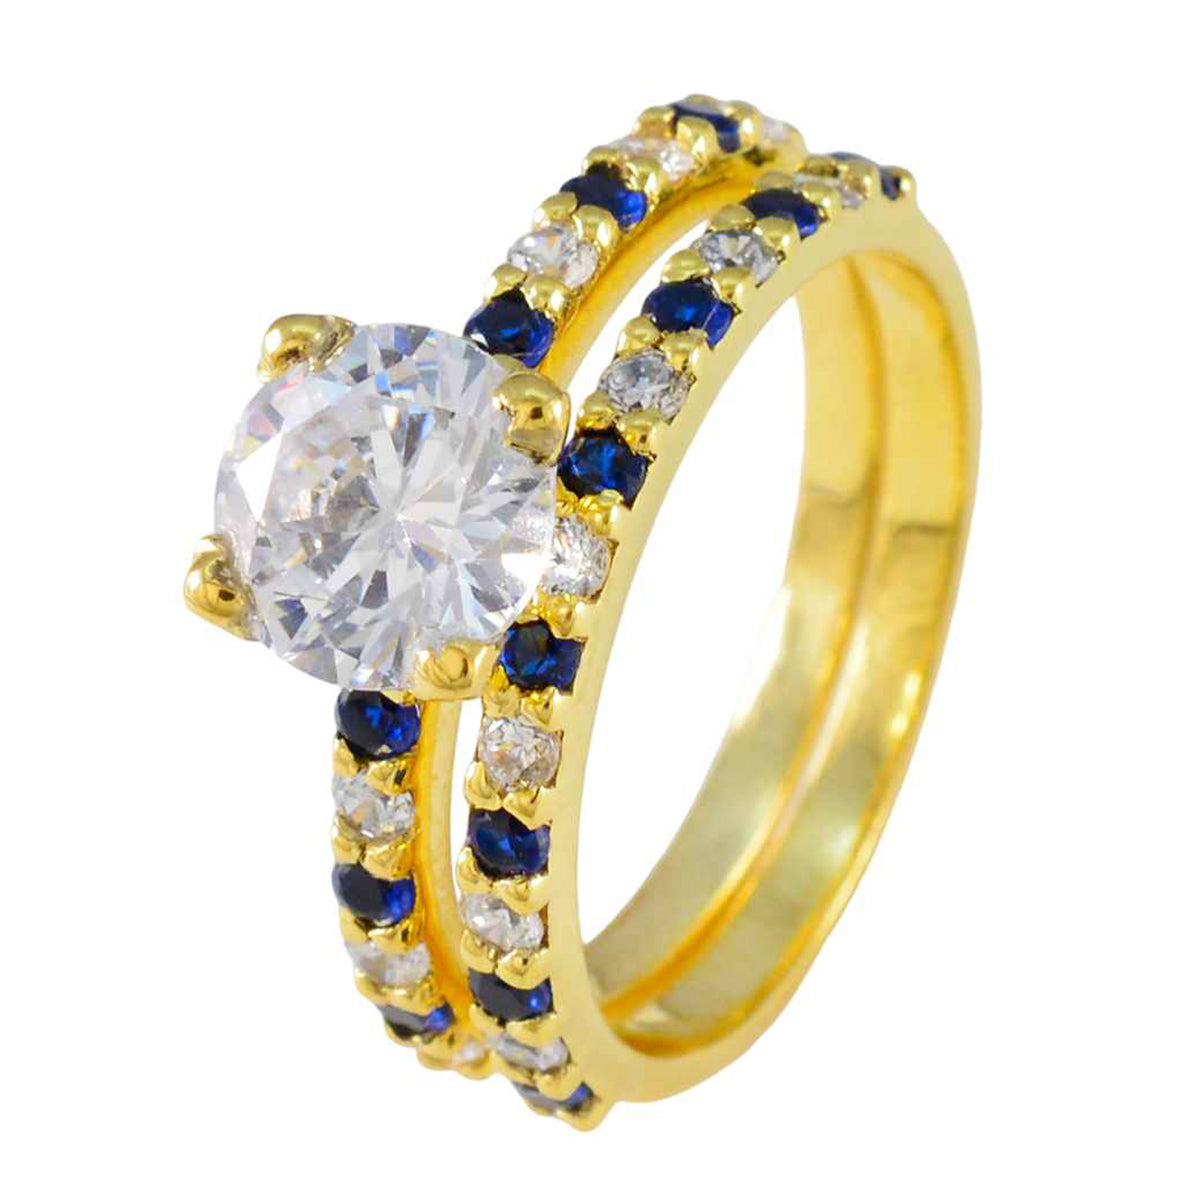 Riyo Rare Silver Ring With Yellow Gold Plating Blue Sapphire Stone Round Shape Prong Setting  Jewelry Easter Ring